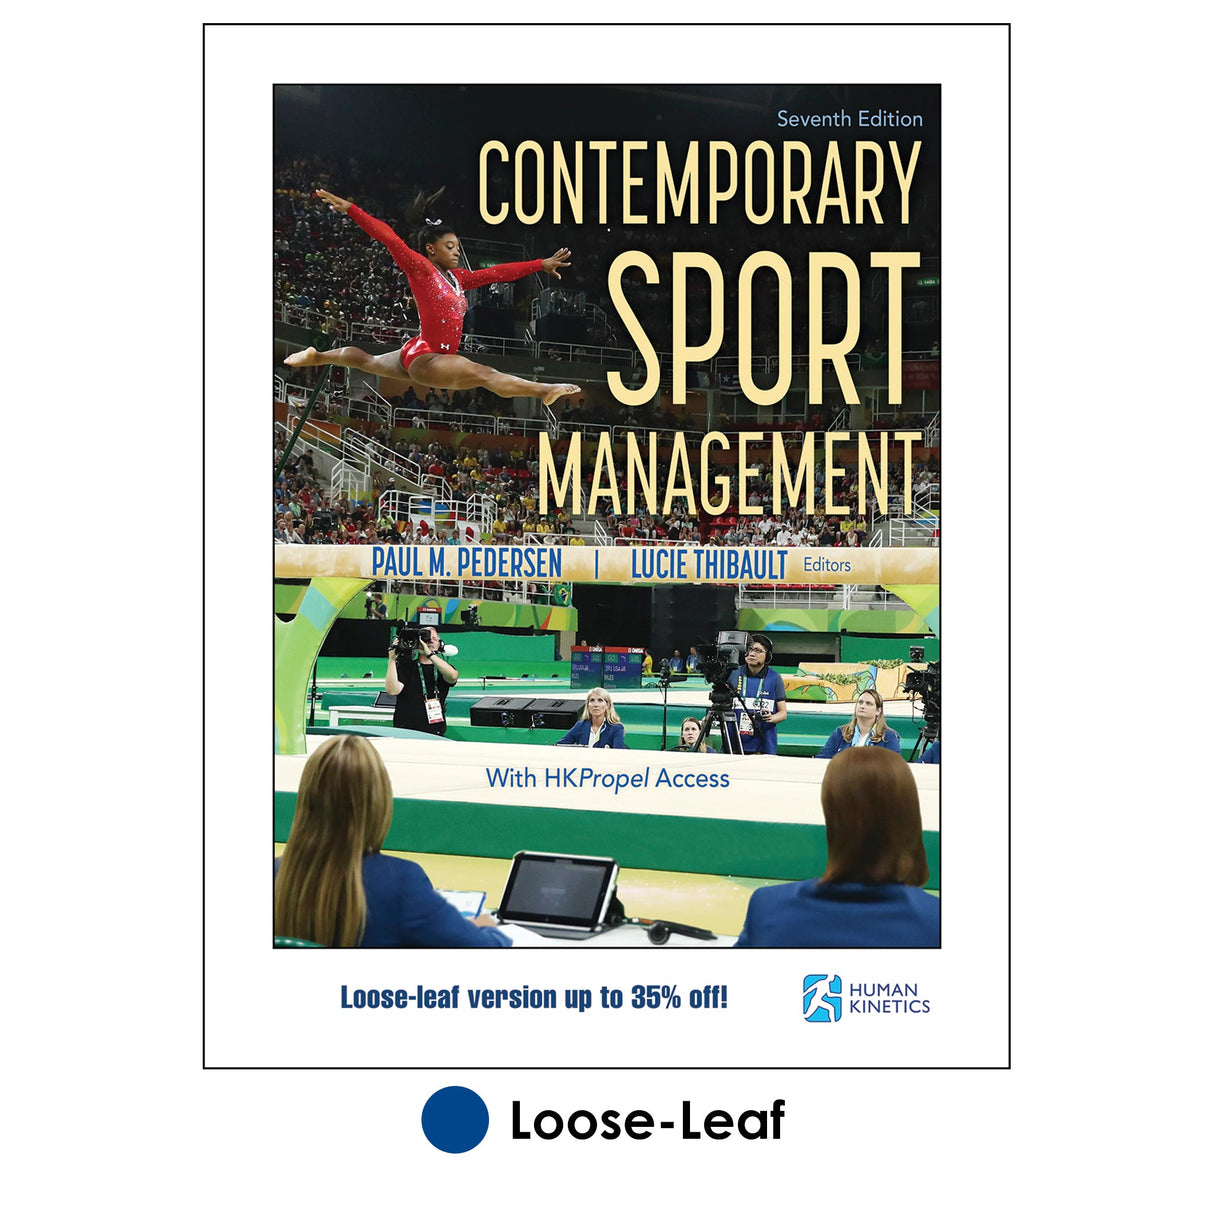 Contemporary Sport Management 7th Edition With HKPropel Access-Loose-Leaf
Edition